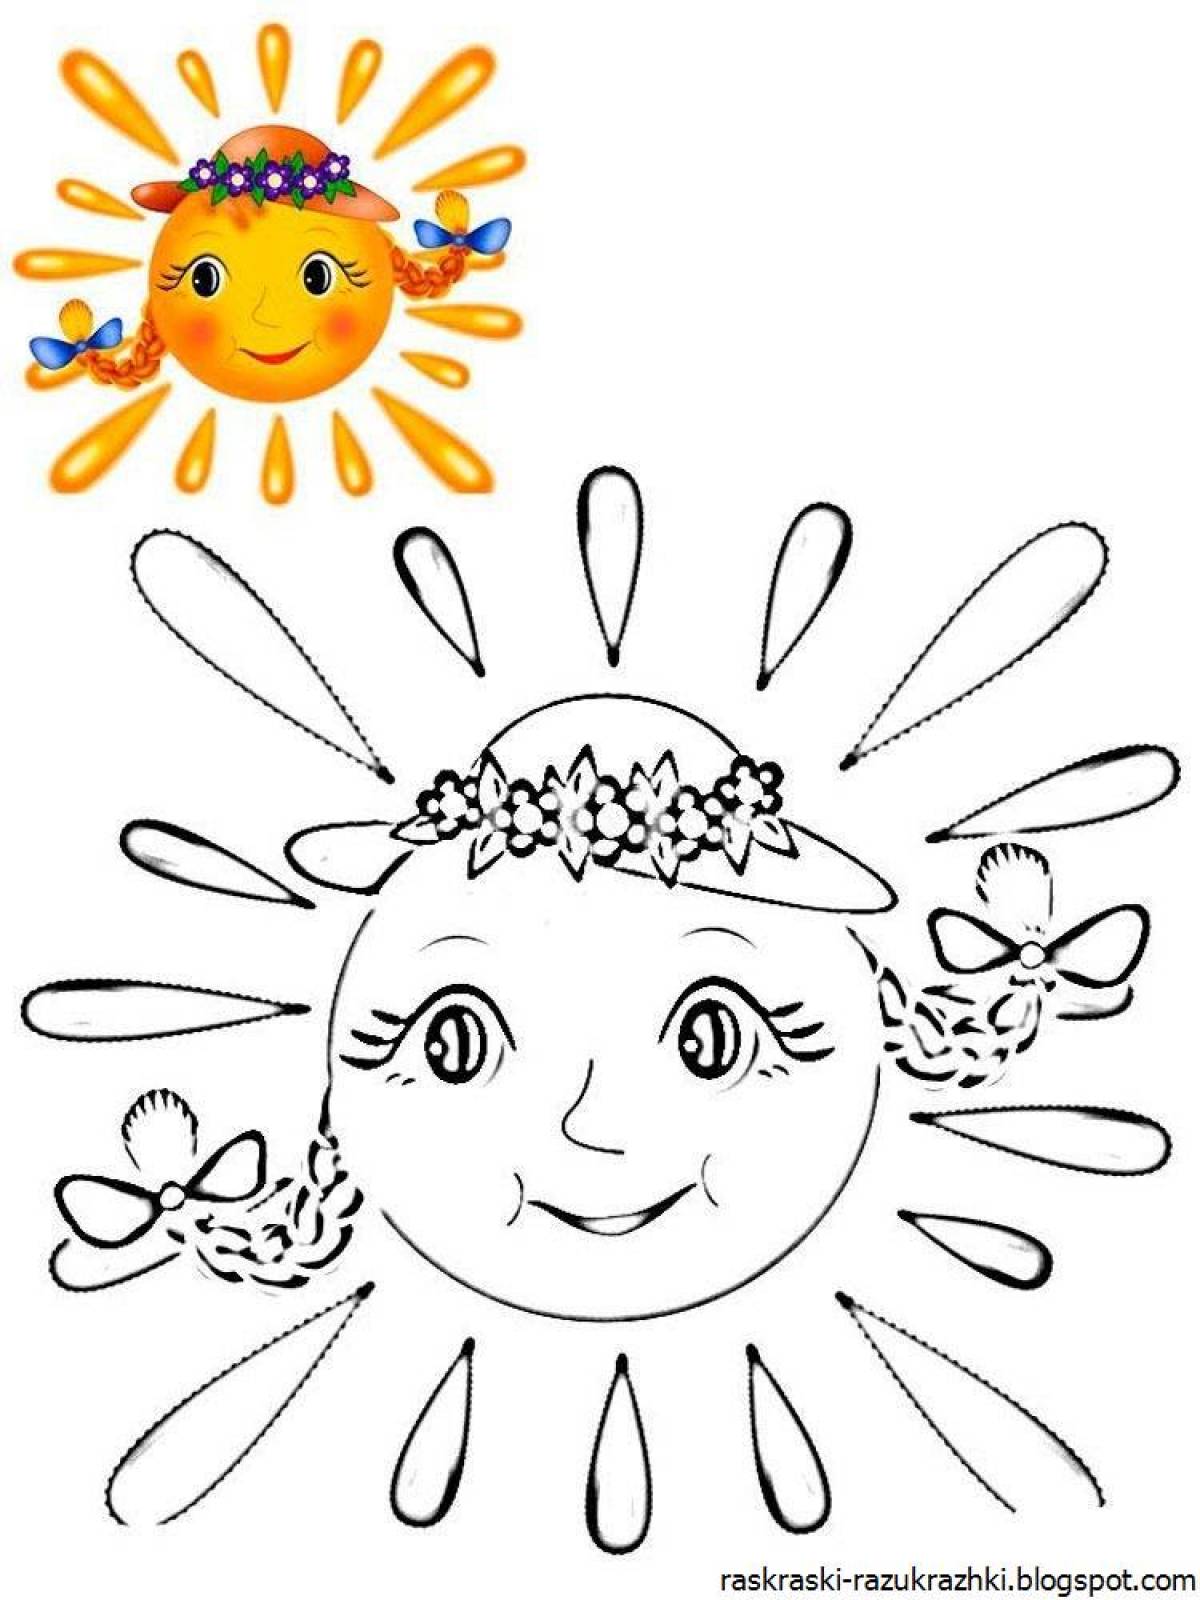 Blissful sun coloring for kids